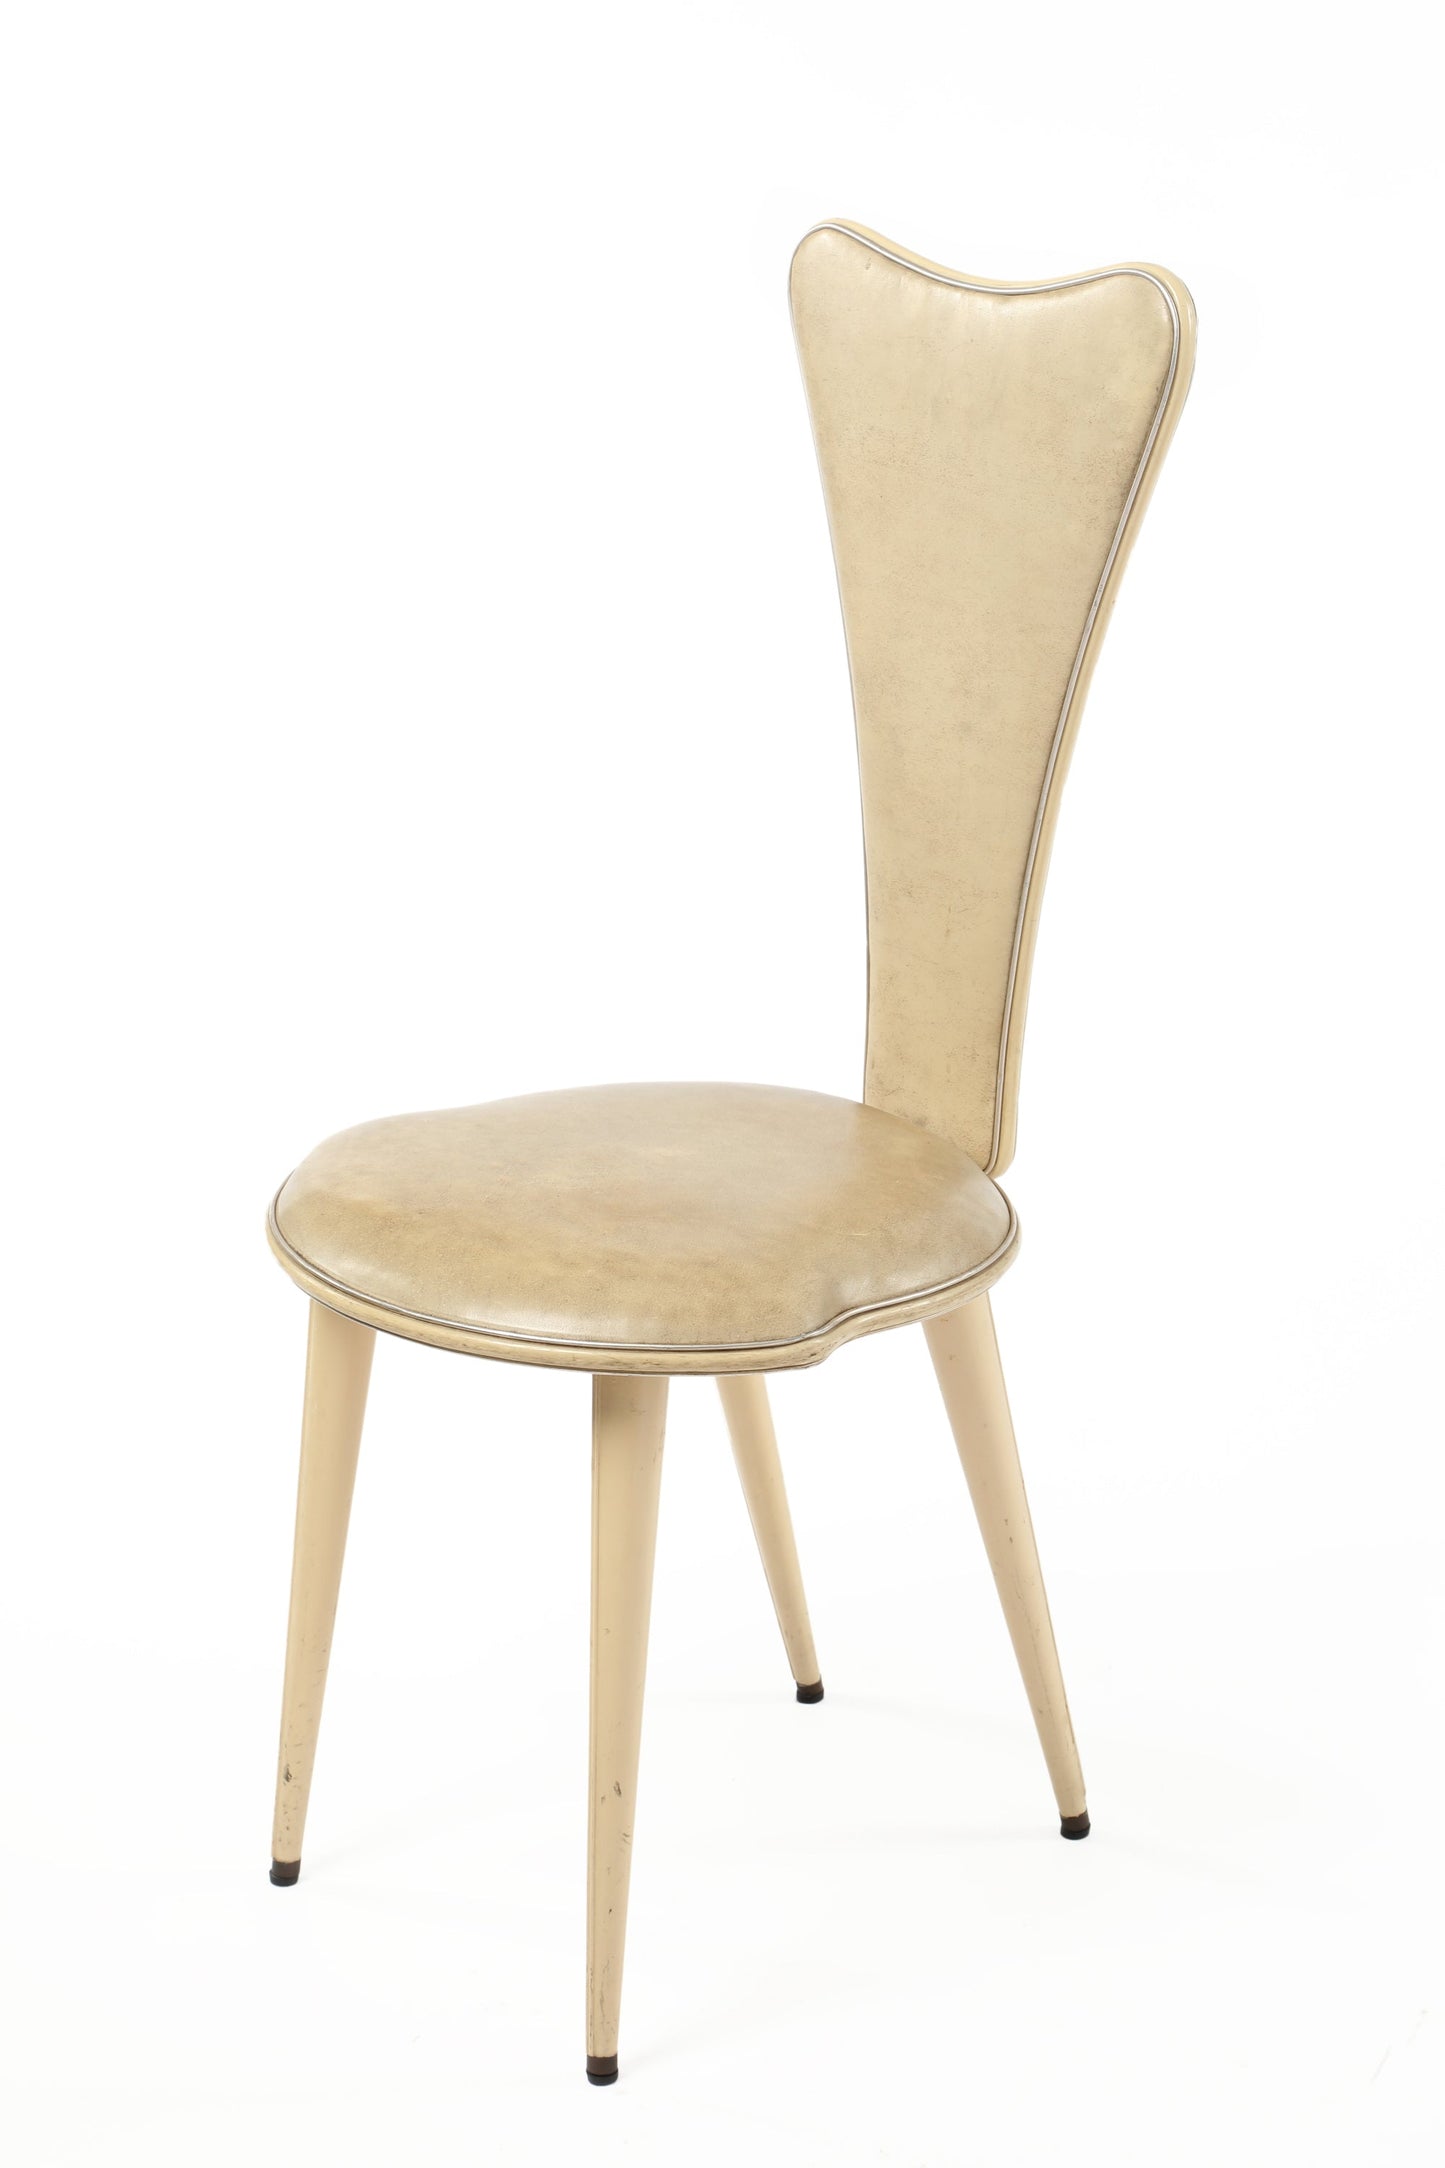 Six Umberto Mascagni chairs from the 1950s in ivory skai